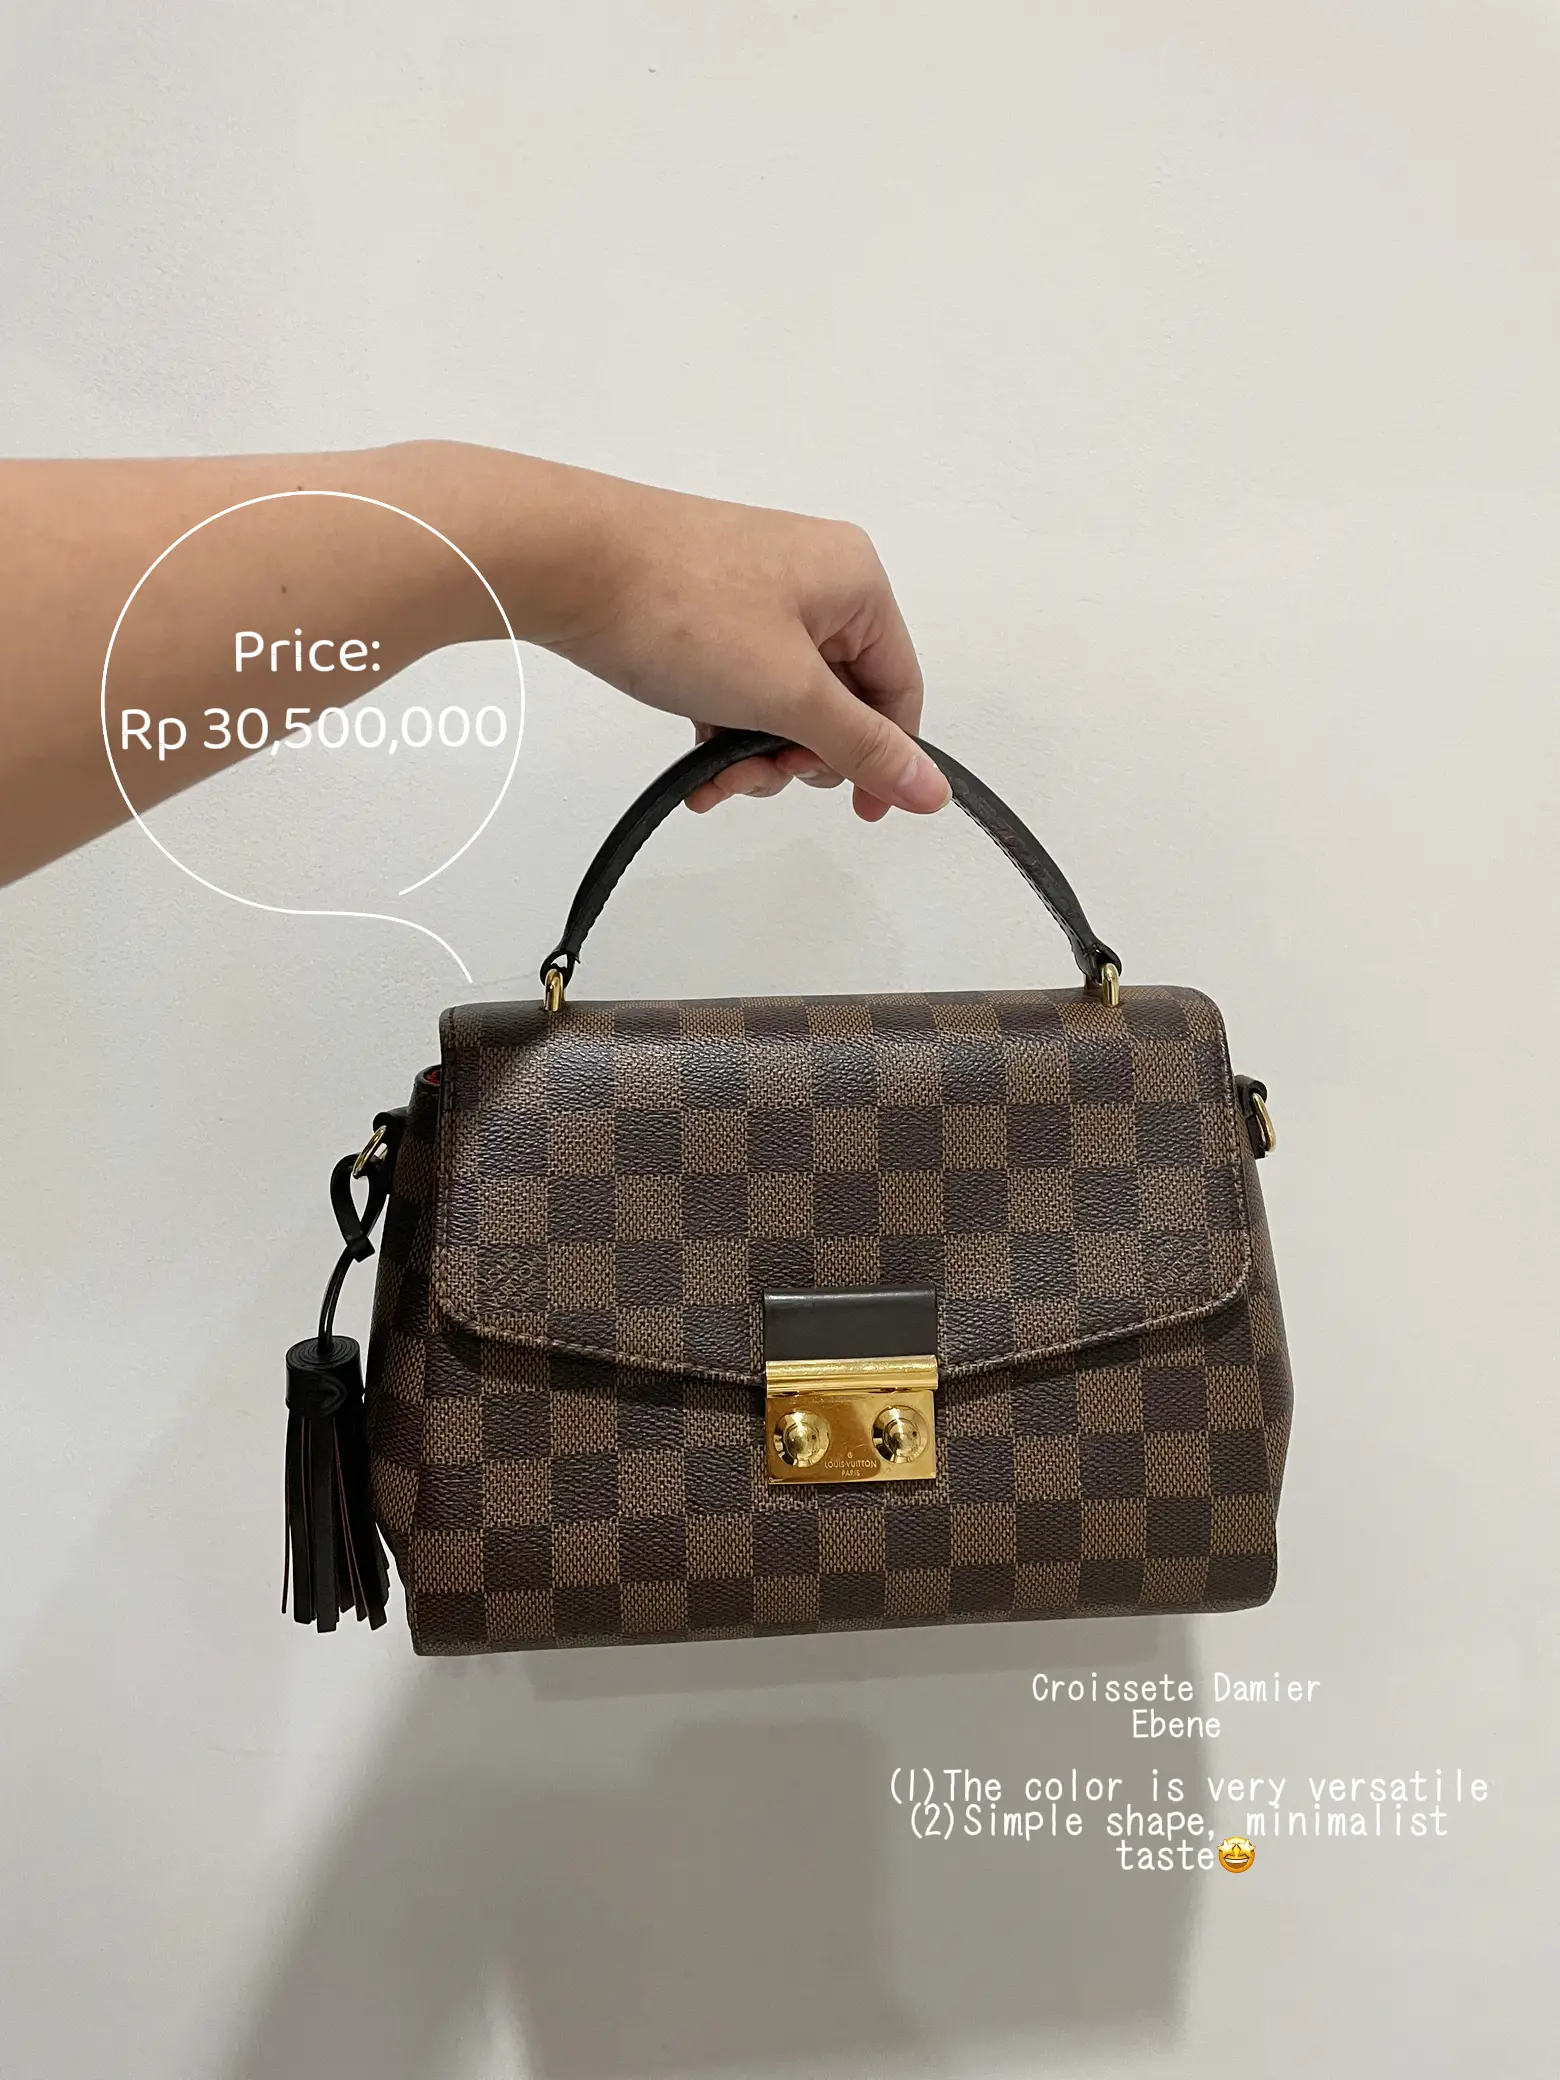 Louis Vuitton Monceau Bag Review, Gallery posted by Lexie